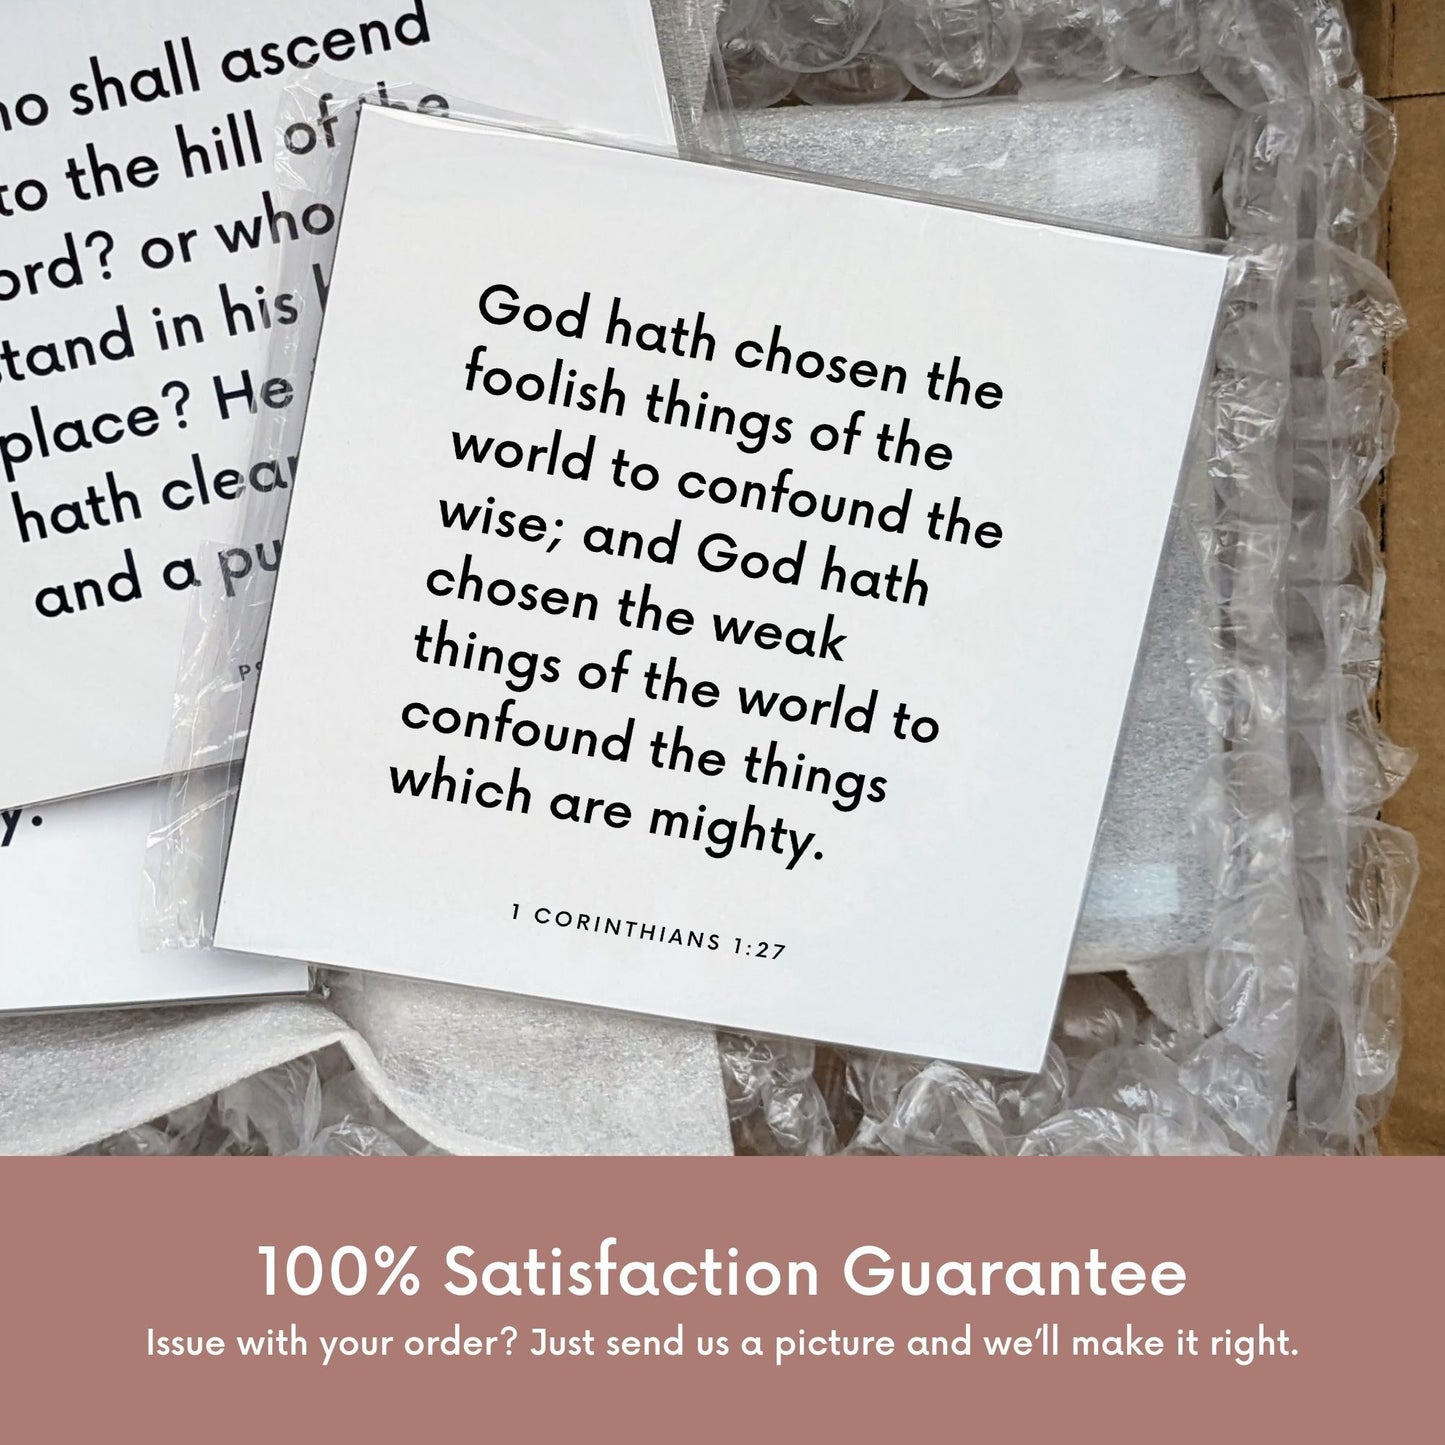 Shipping materials for scripture tile of 1 Corinthians 1:27 - "God hath chosen the foolish things of the world"